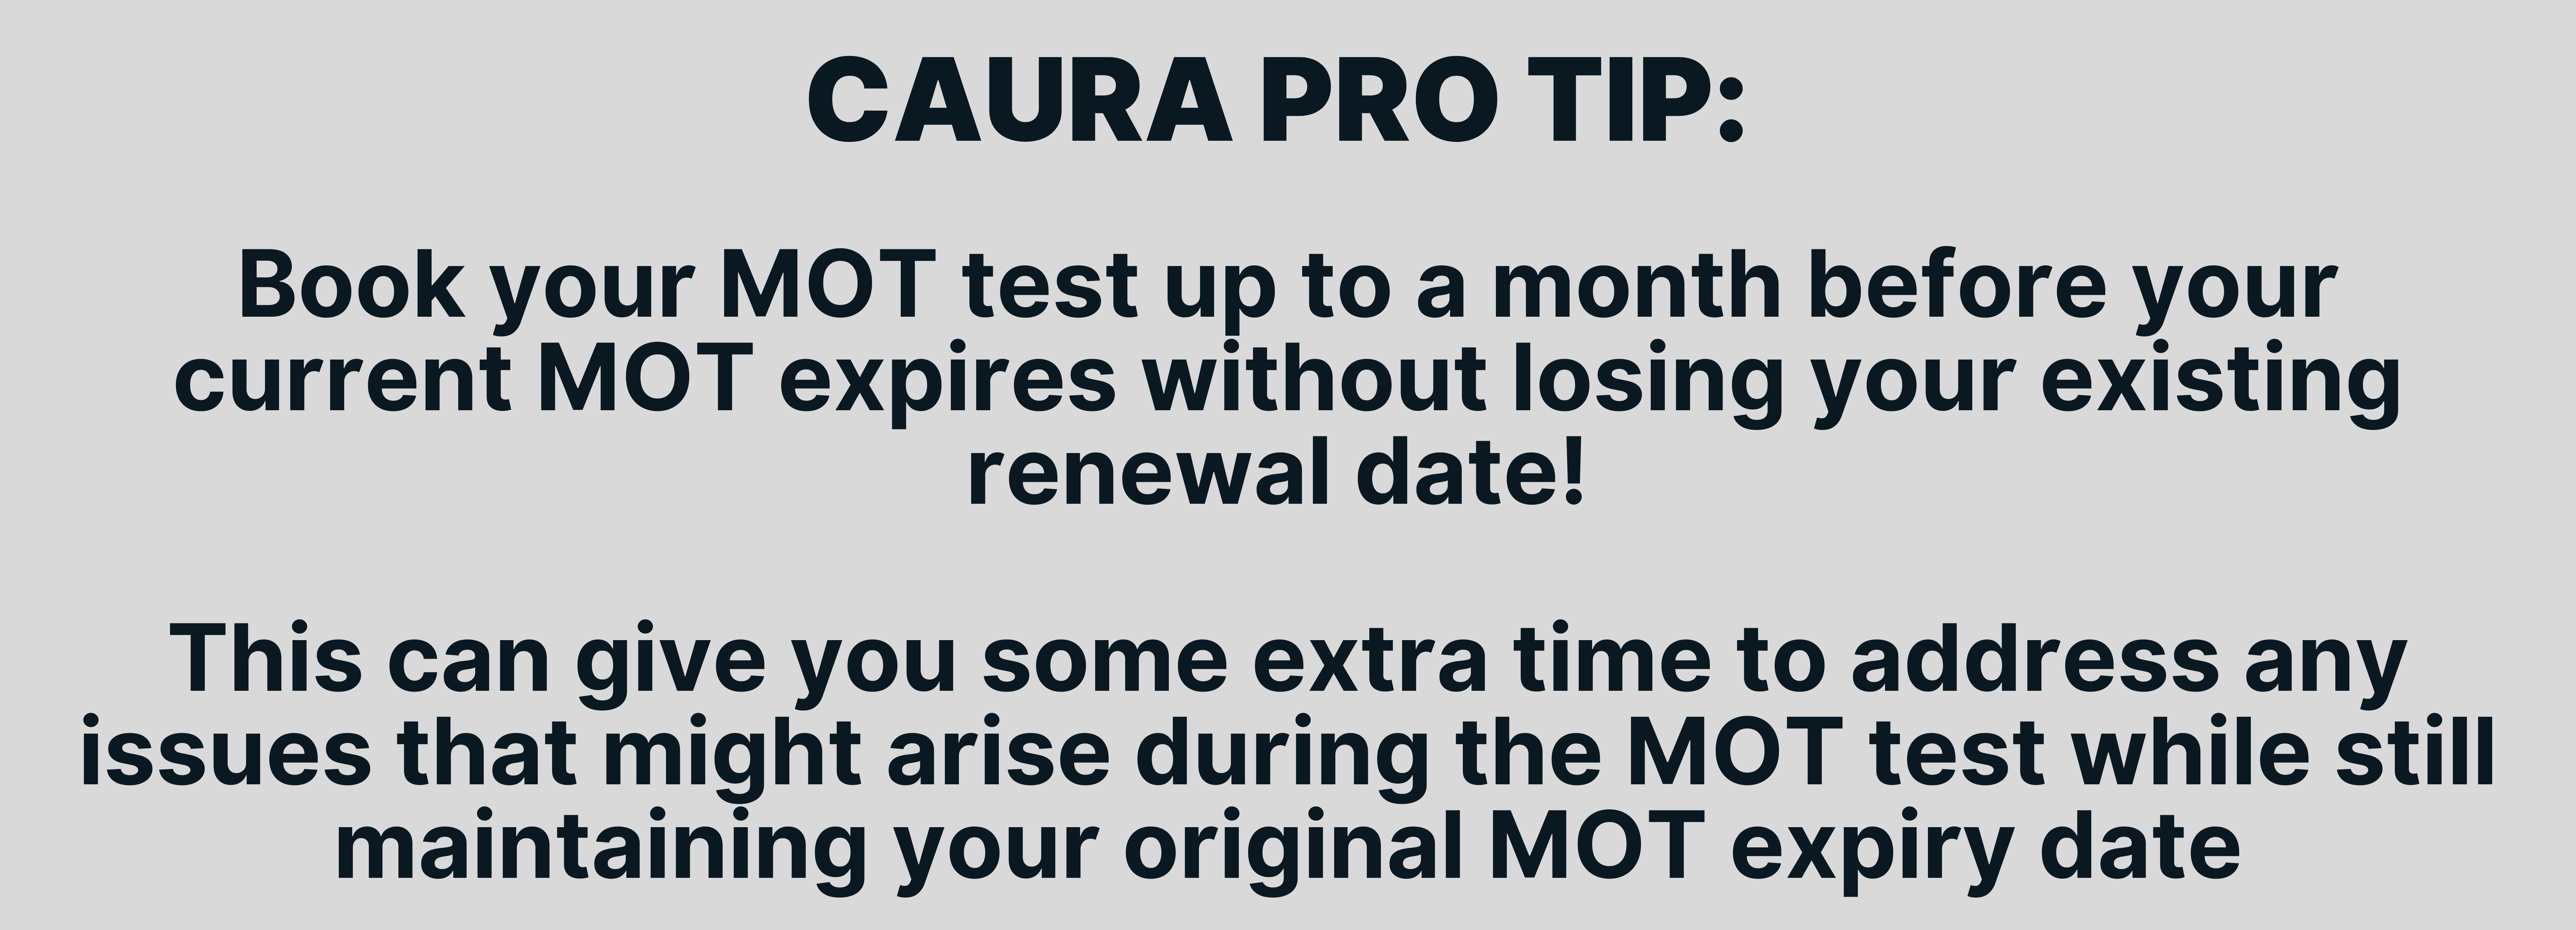 Book your MOT test up to a month before your current MOT expires without losing your existing renewal date! 

This can give you some extra time to address any issues that might arise during the MOT test while still maintaining your original MOT expiry date